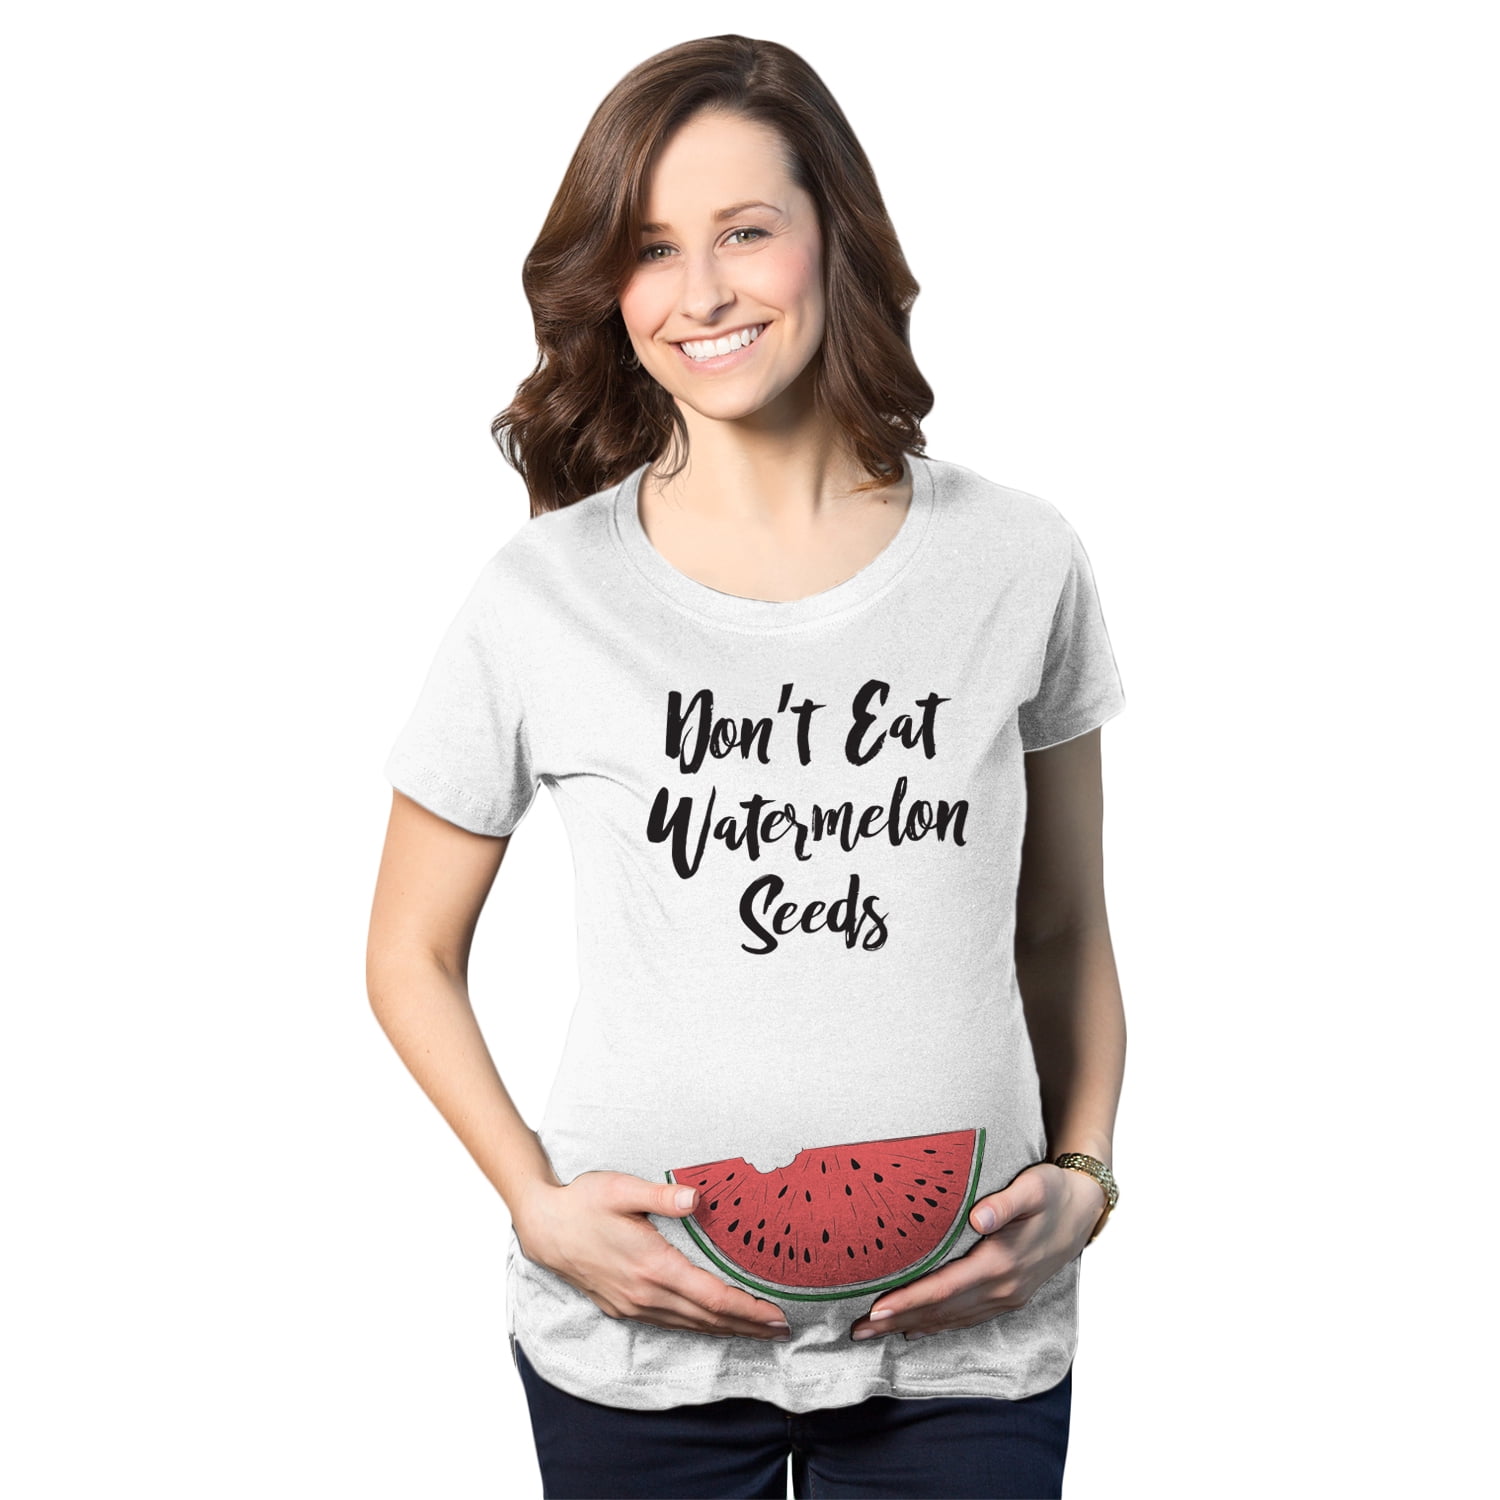 Don't Eat Watermelon Seeds  Shirt Pregnancy Announcement First Time Pregnancy Funny Meme Pregnancy Reveal Shirt Plus Size Clothing Mom Shirt